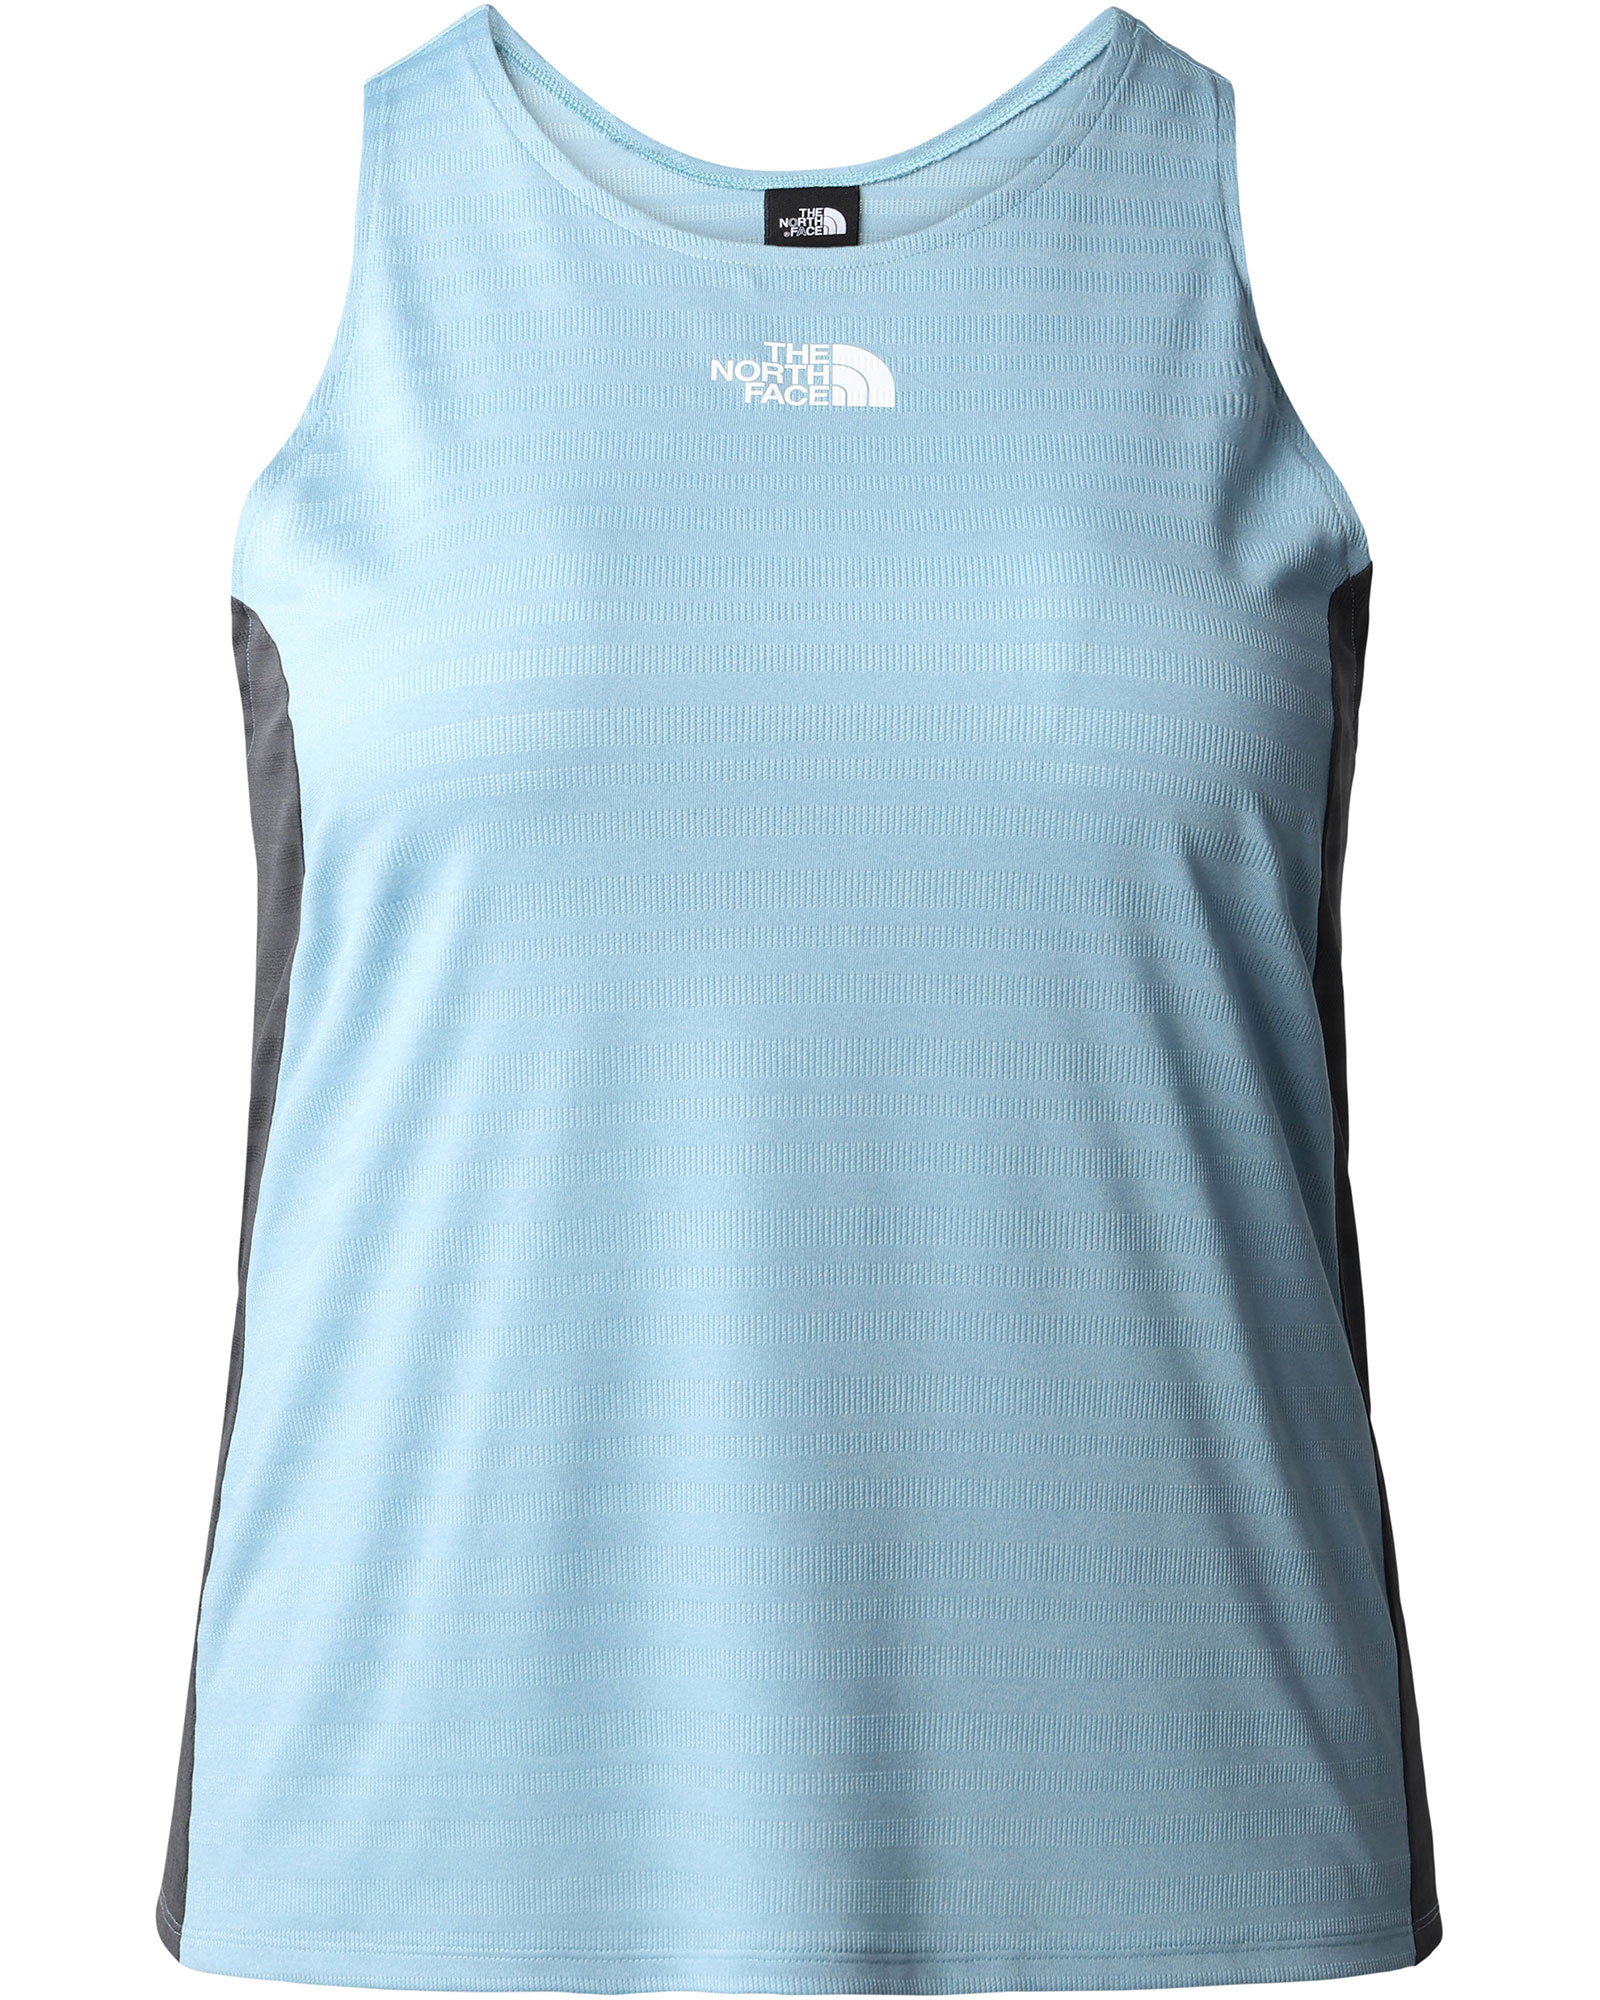 The North Face Women’s Plus MA Tank - Reef Waters 1X